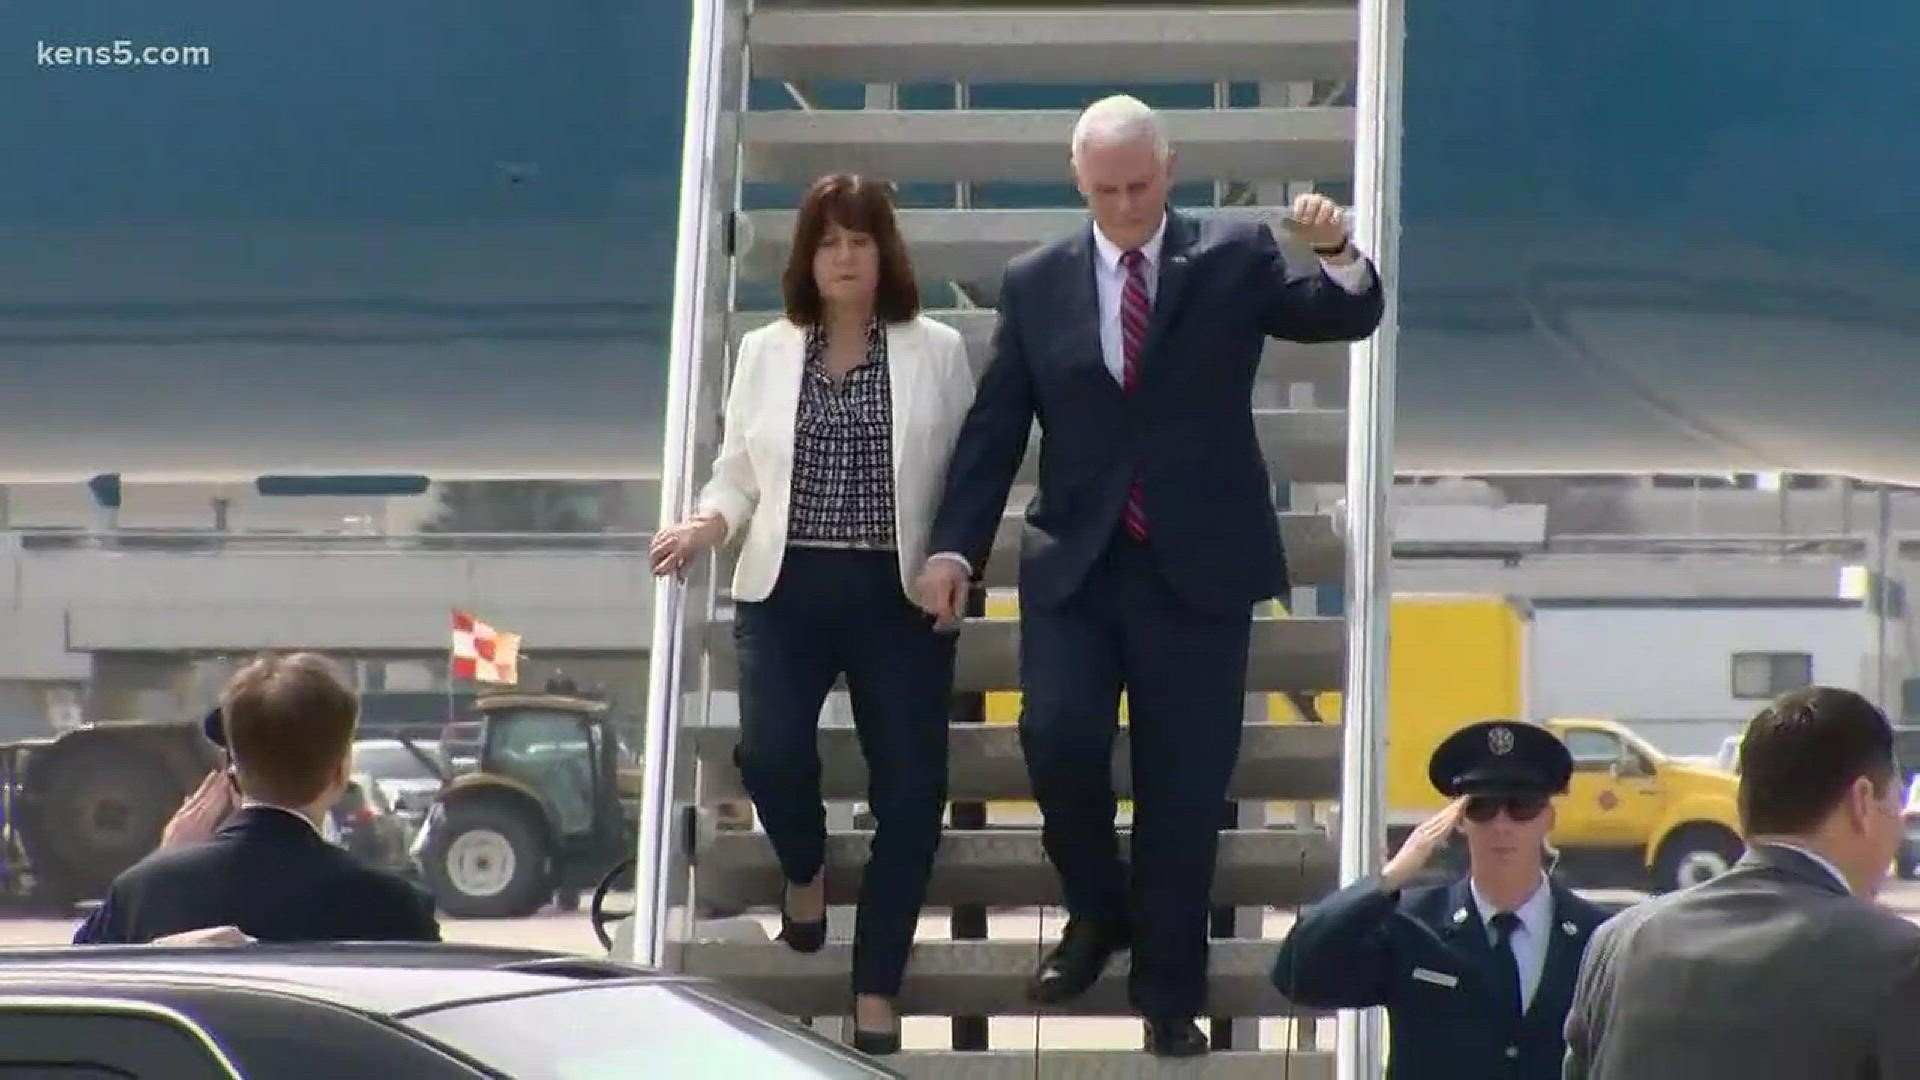 Downtown visitors were swept up in the excitement of a vice presidential visit on Friday.